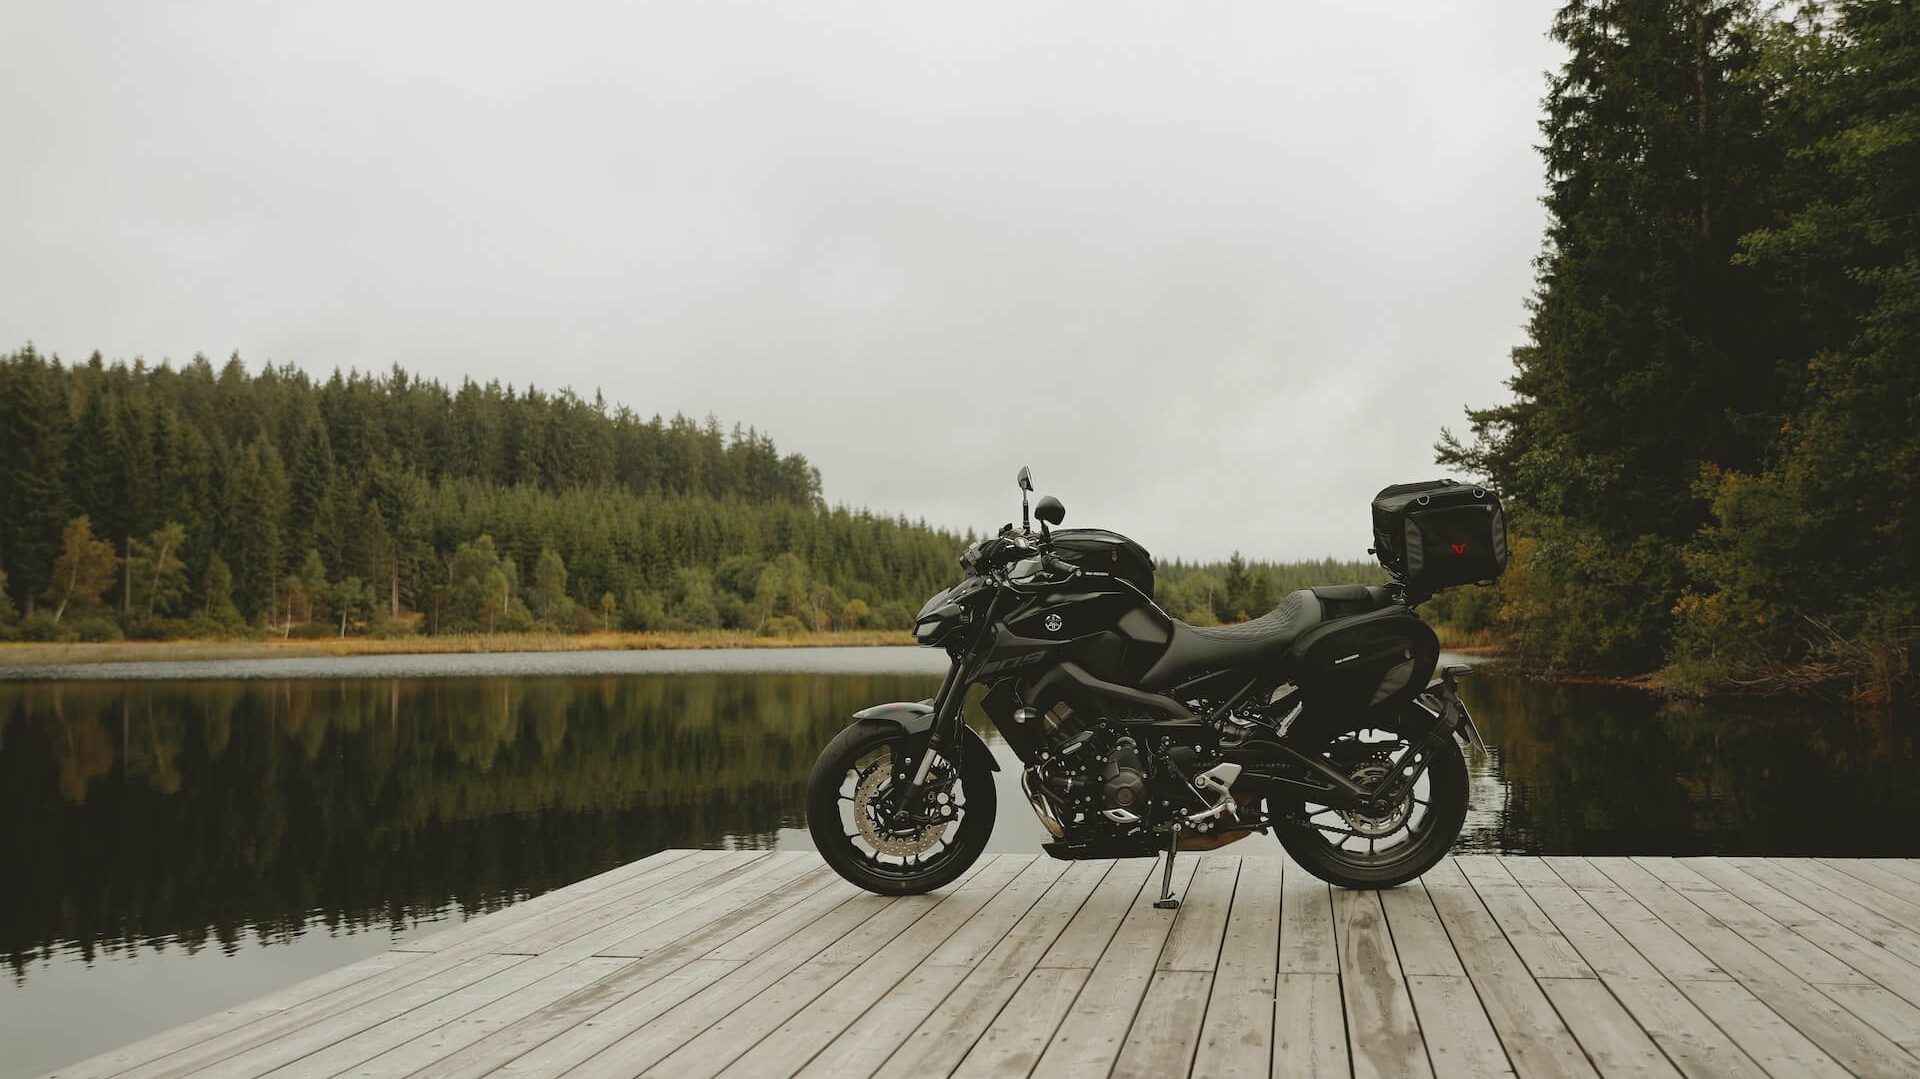 Thrills and excitement on the Yamaha MT 09 motorcycle